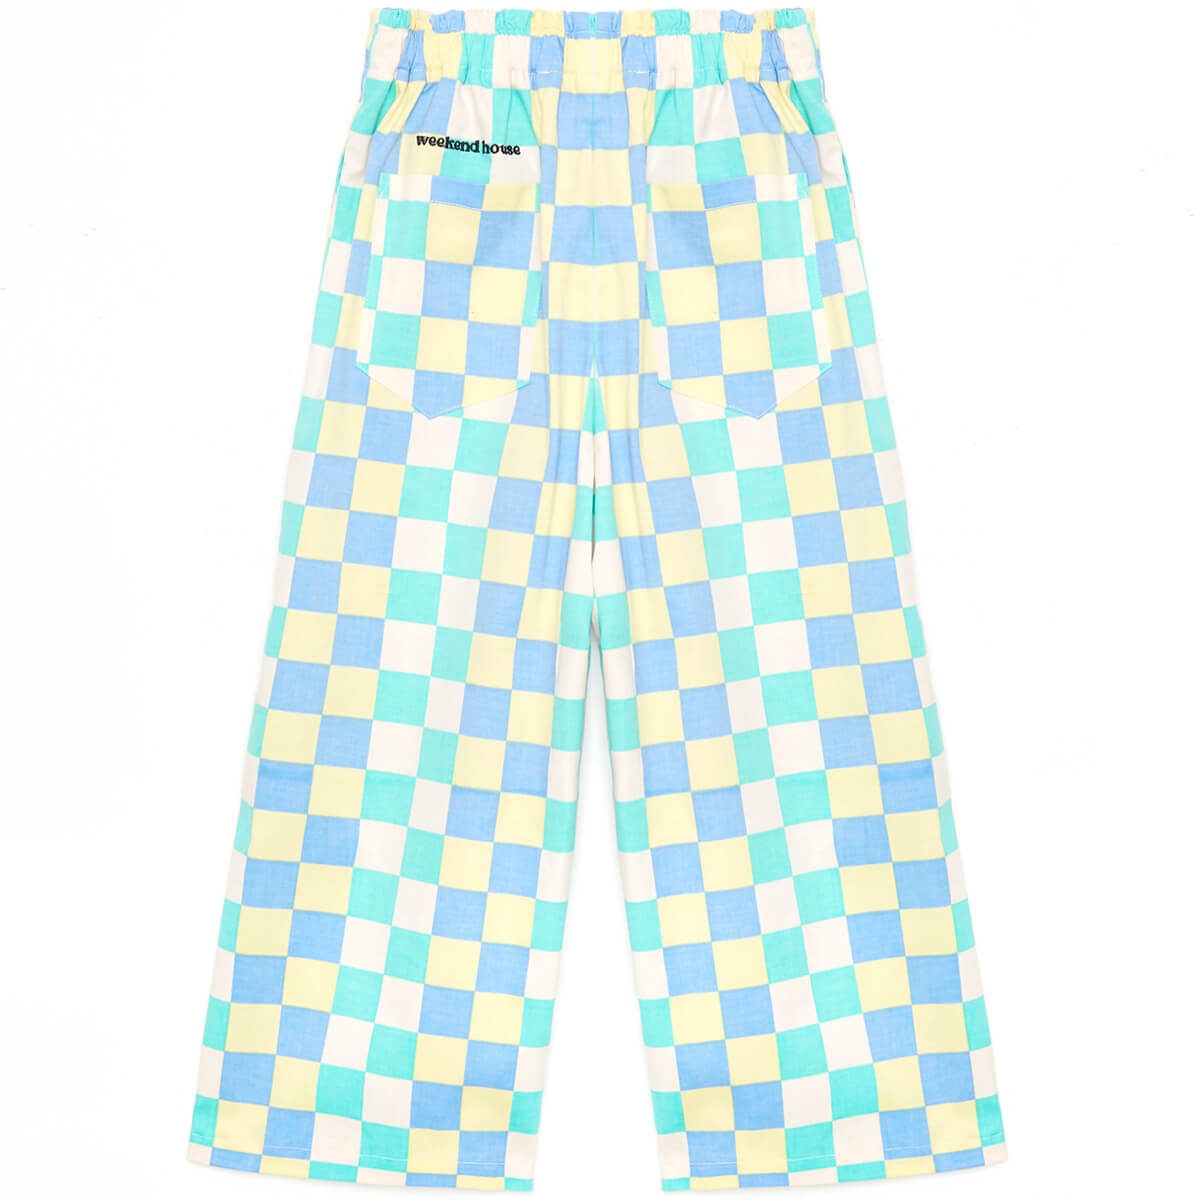 Chess Flare Pants in Multicolour by Weekend House Kids - Last